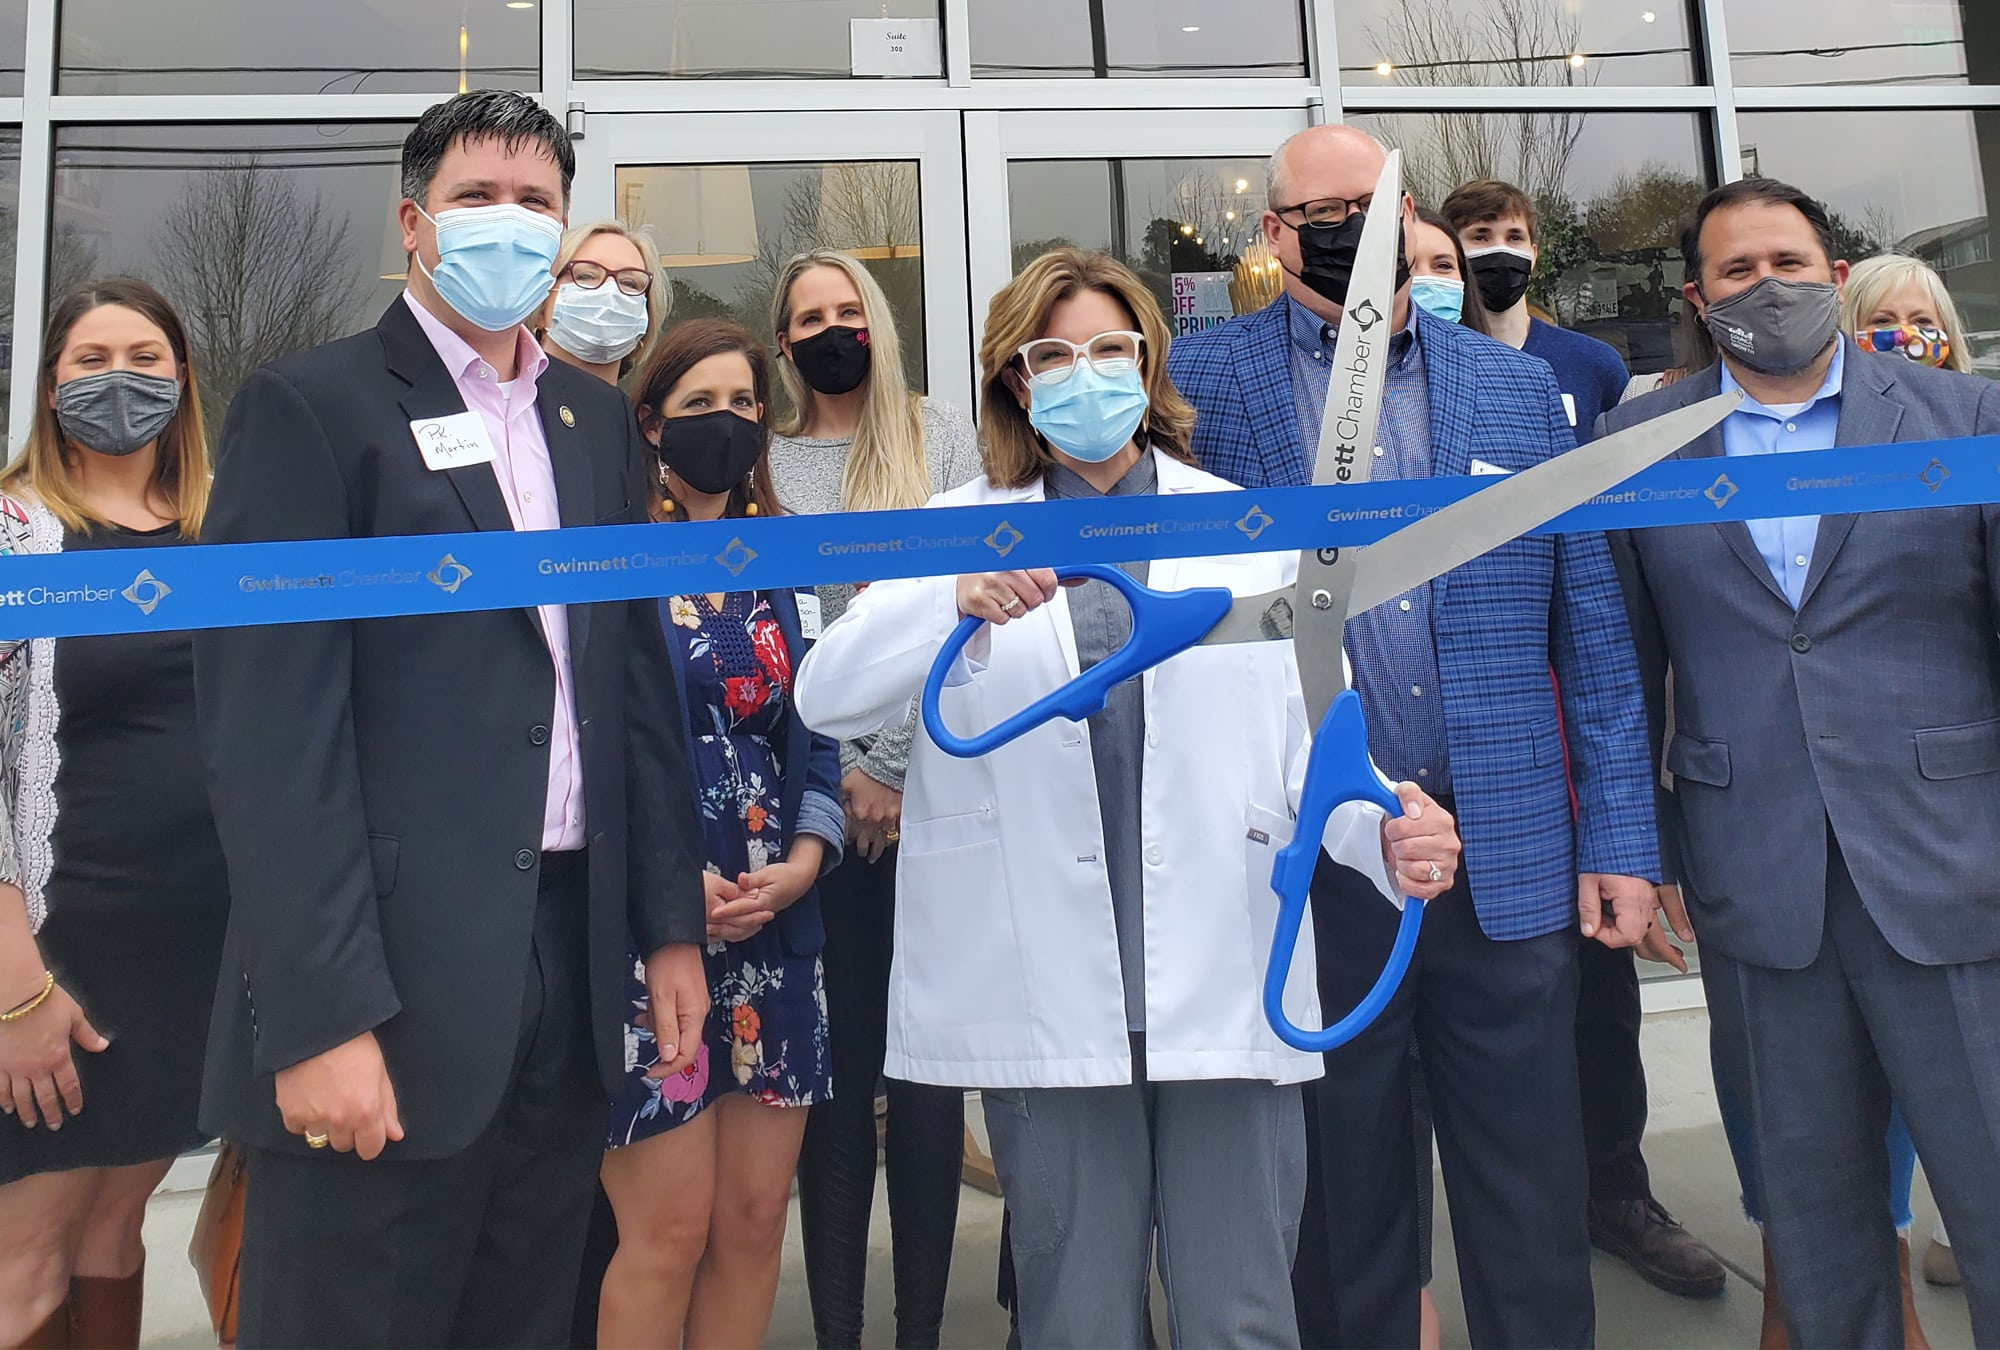 About Face Skin Care Celebrates Opening of Second Location